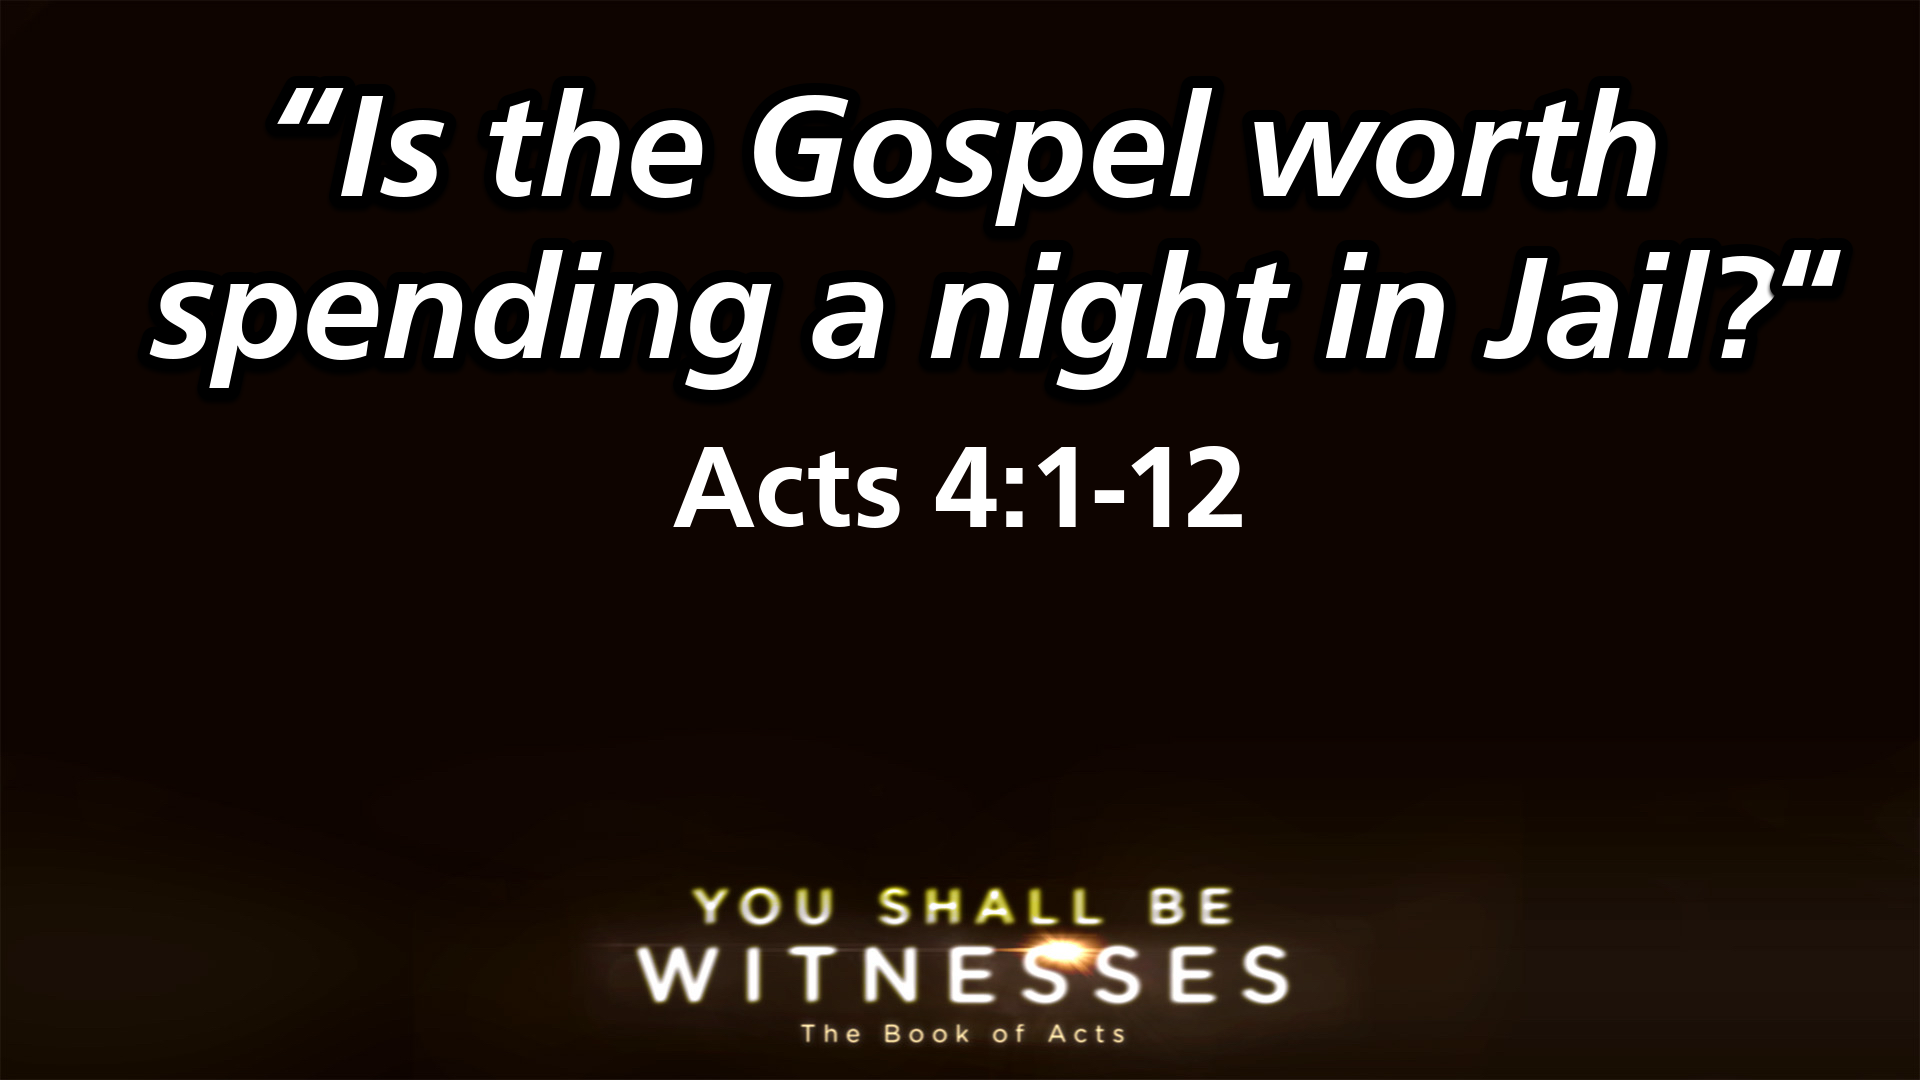 “Is the Gospel worth spending a night in Jail?”